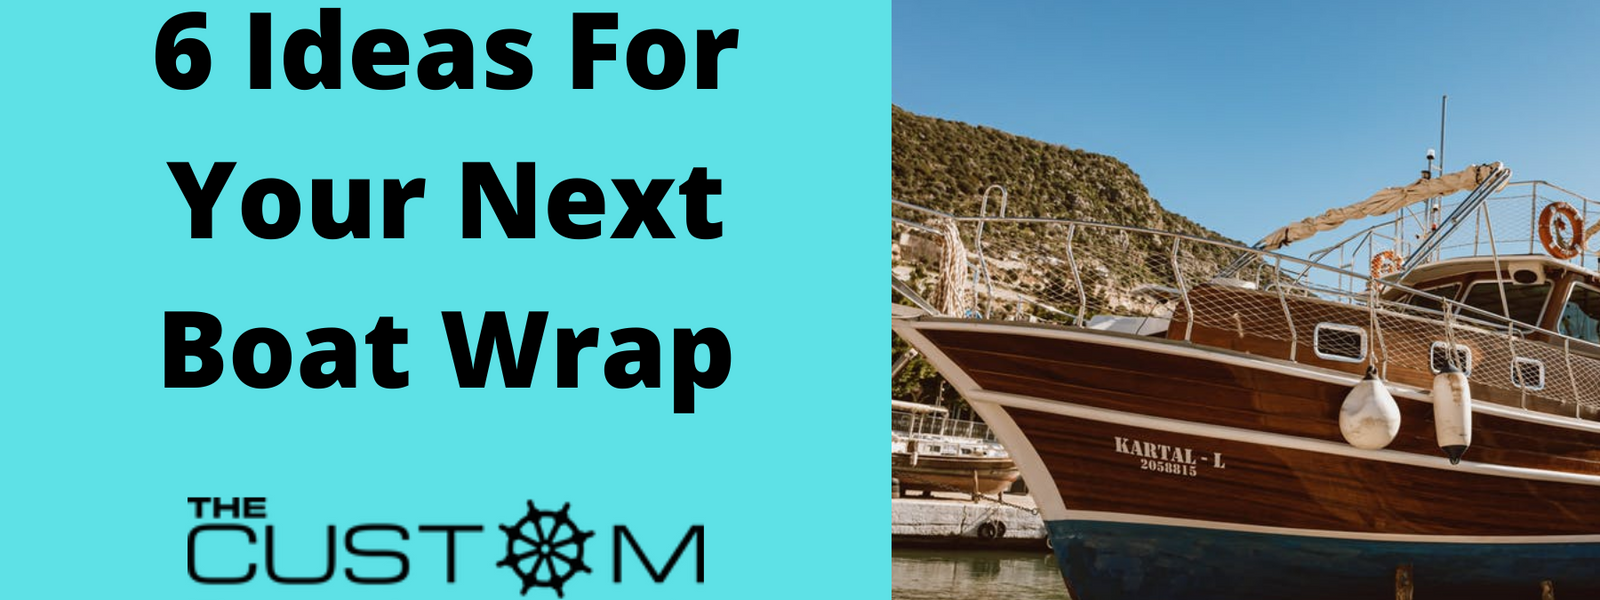 6 Ideas For Your Next Boat Wrap